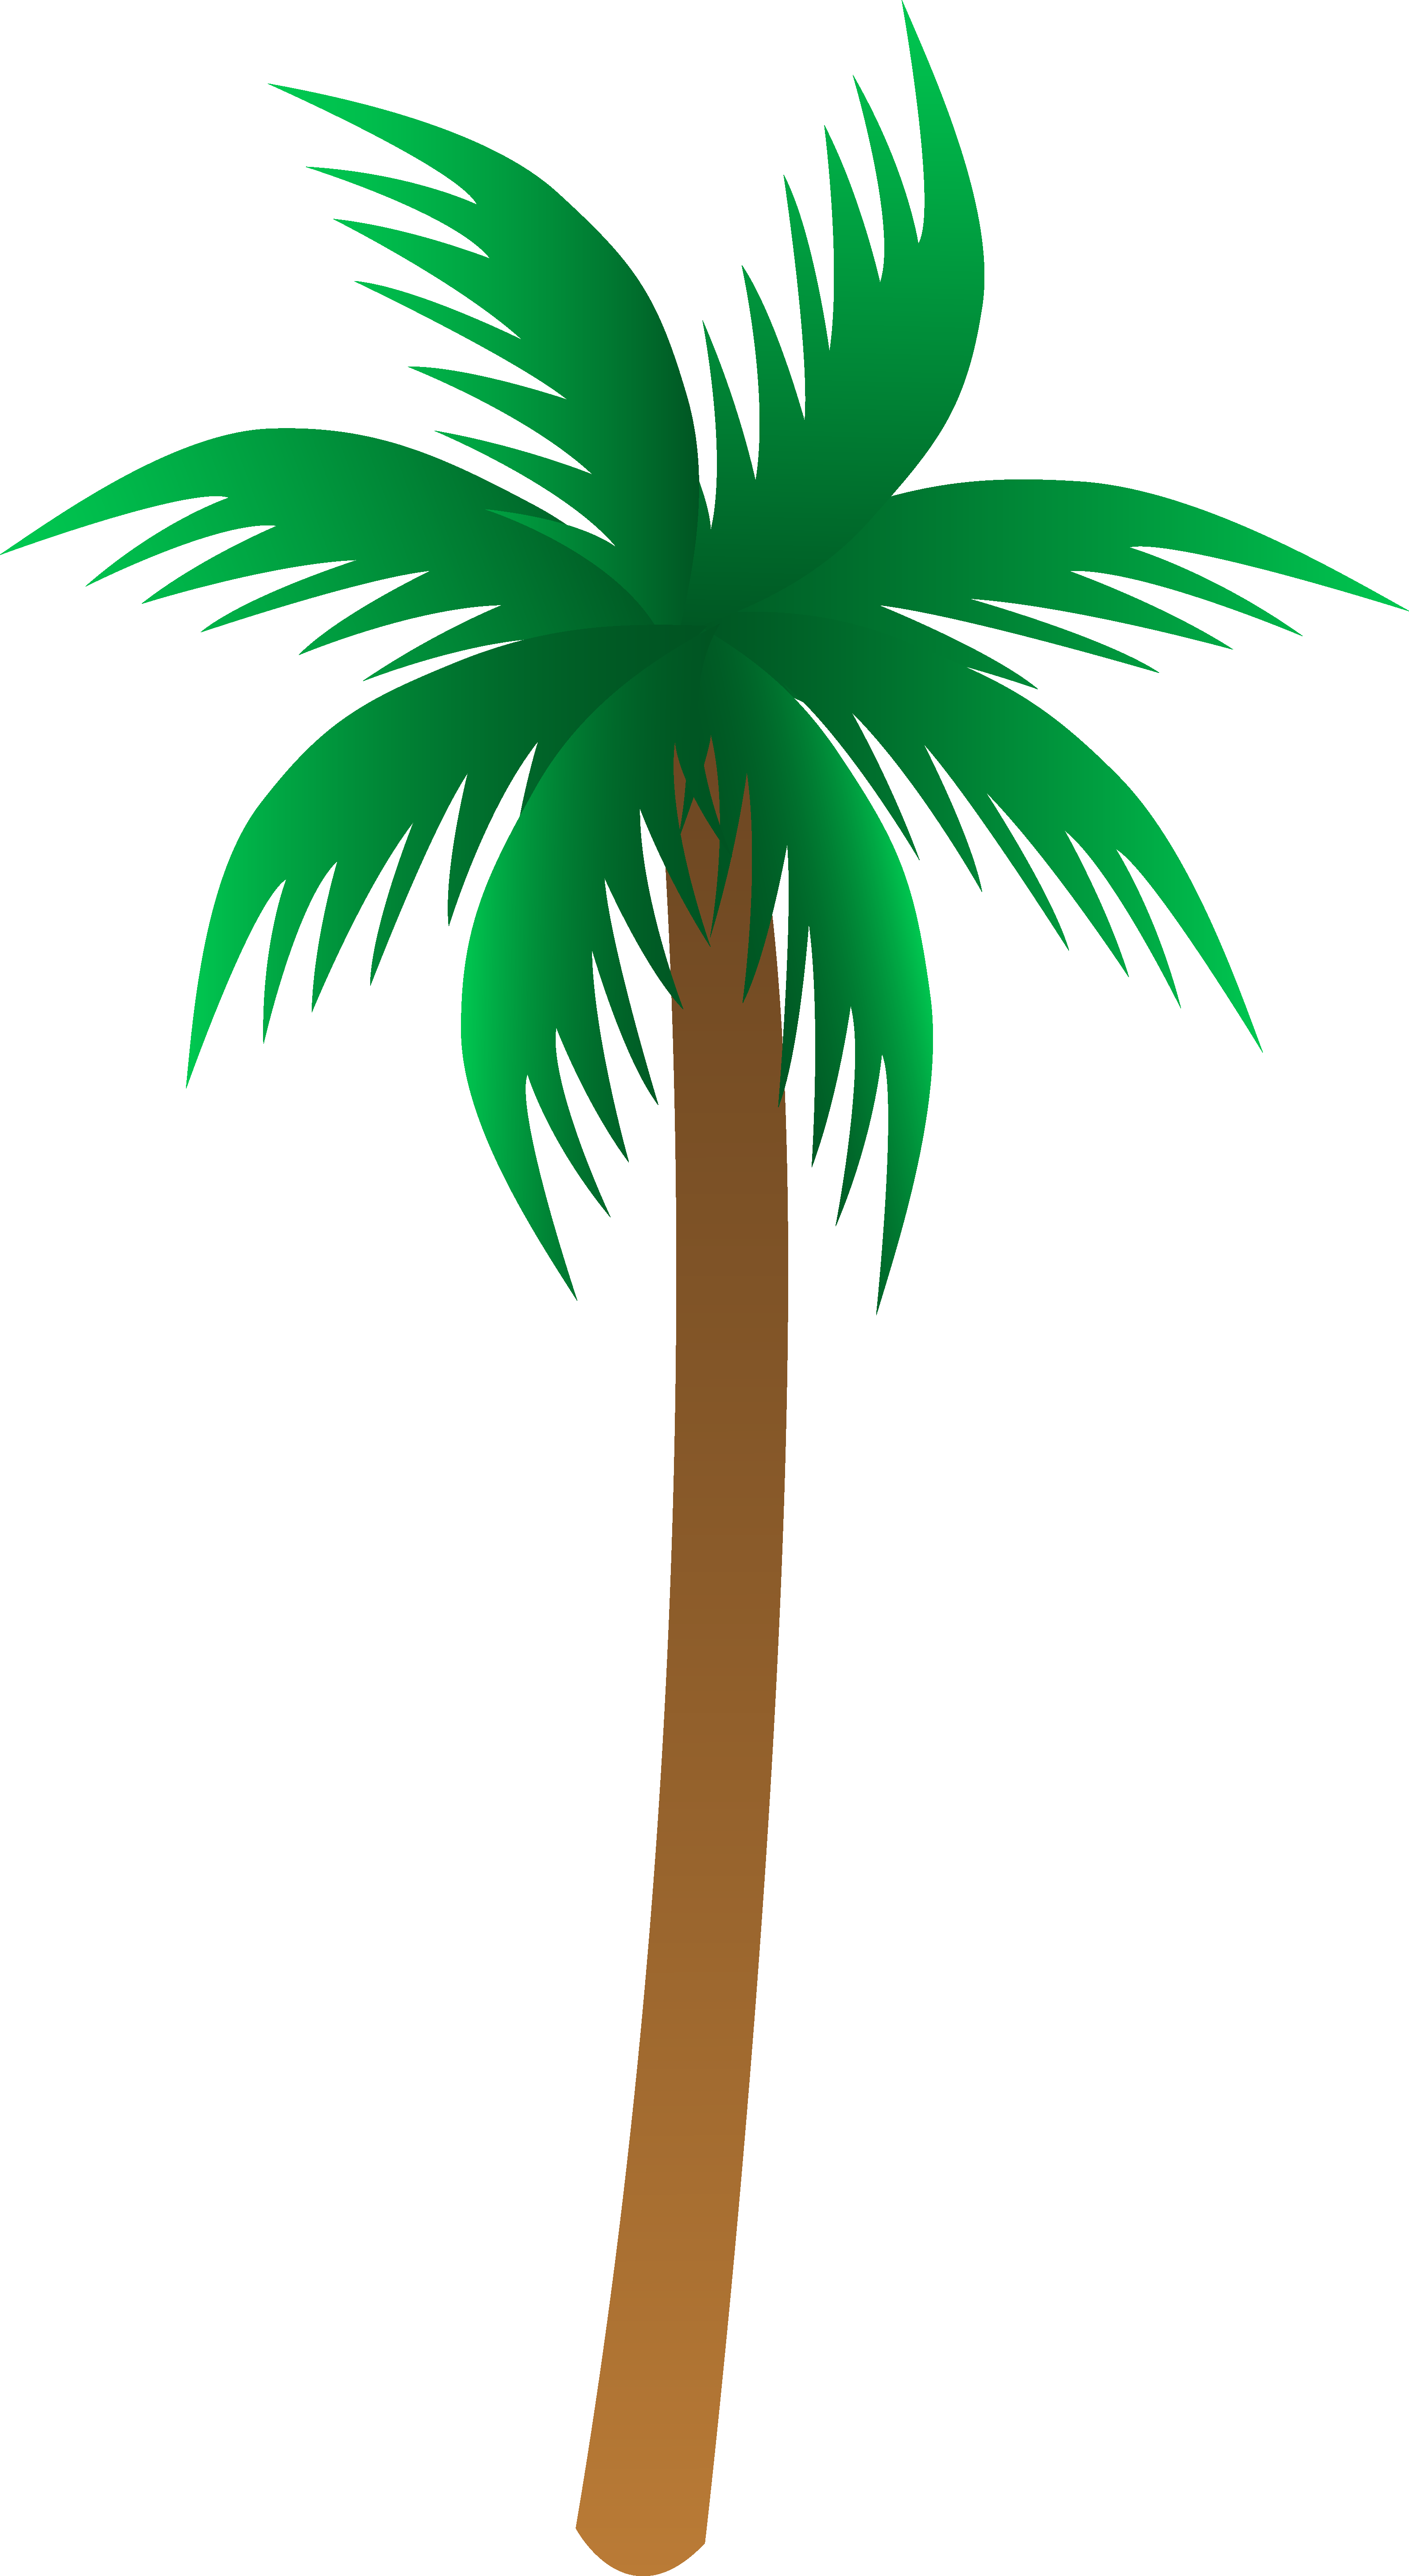 Clipart of a palm tree - Clip